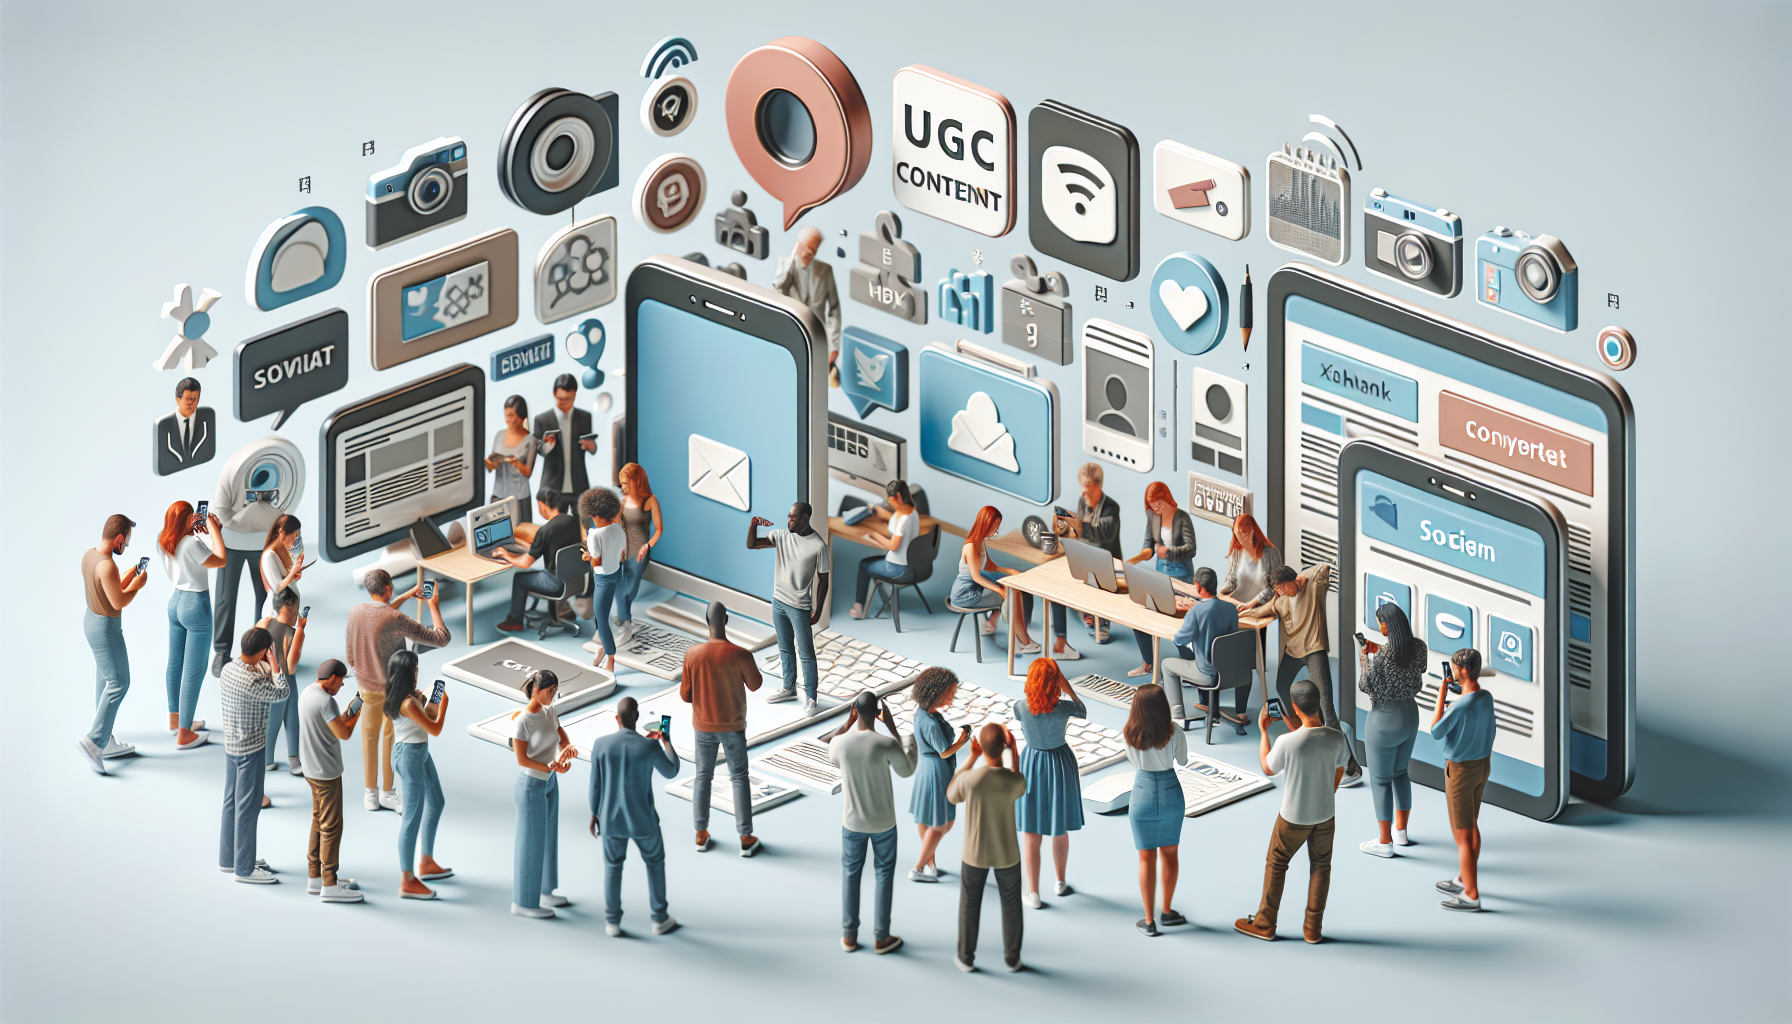 A photorealistic image illustrating the concept of User-Generated Content (UGC). Include an array of elements such as smartphones, computers, diverse group of people creating content, social media icons, and text content. The color palette should be subtle not too bright, including soft blues, warm greys, and pastels. Make sure to depict a balanced representation of men and women from varying descents such as Caucasian, Hispanic, Black, Middle-Eastern, and South Asian.